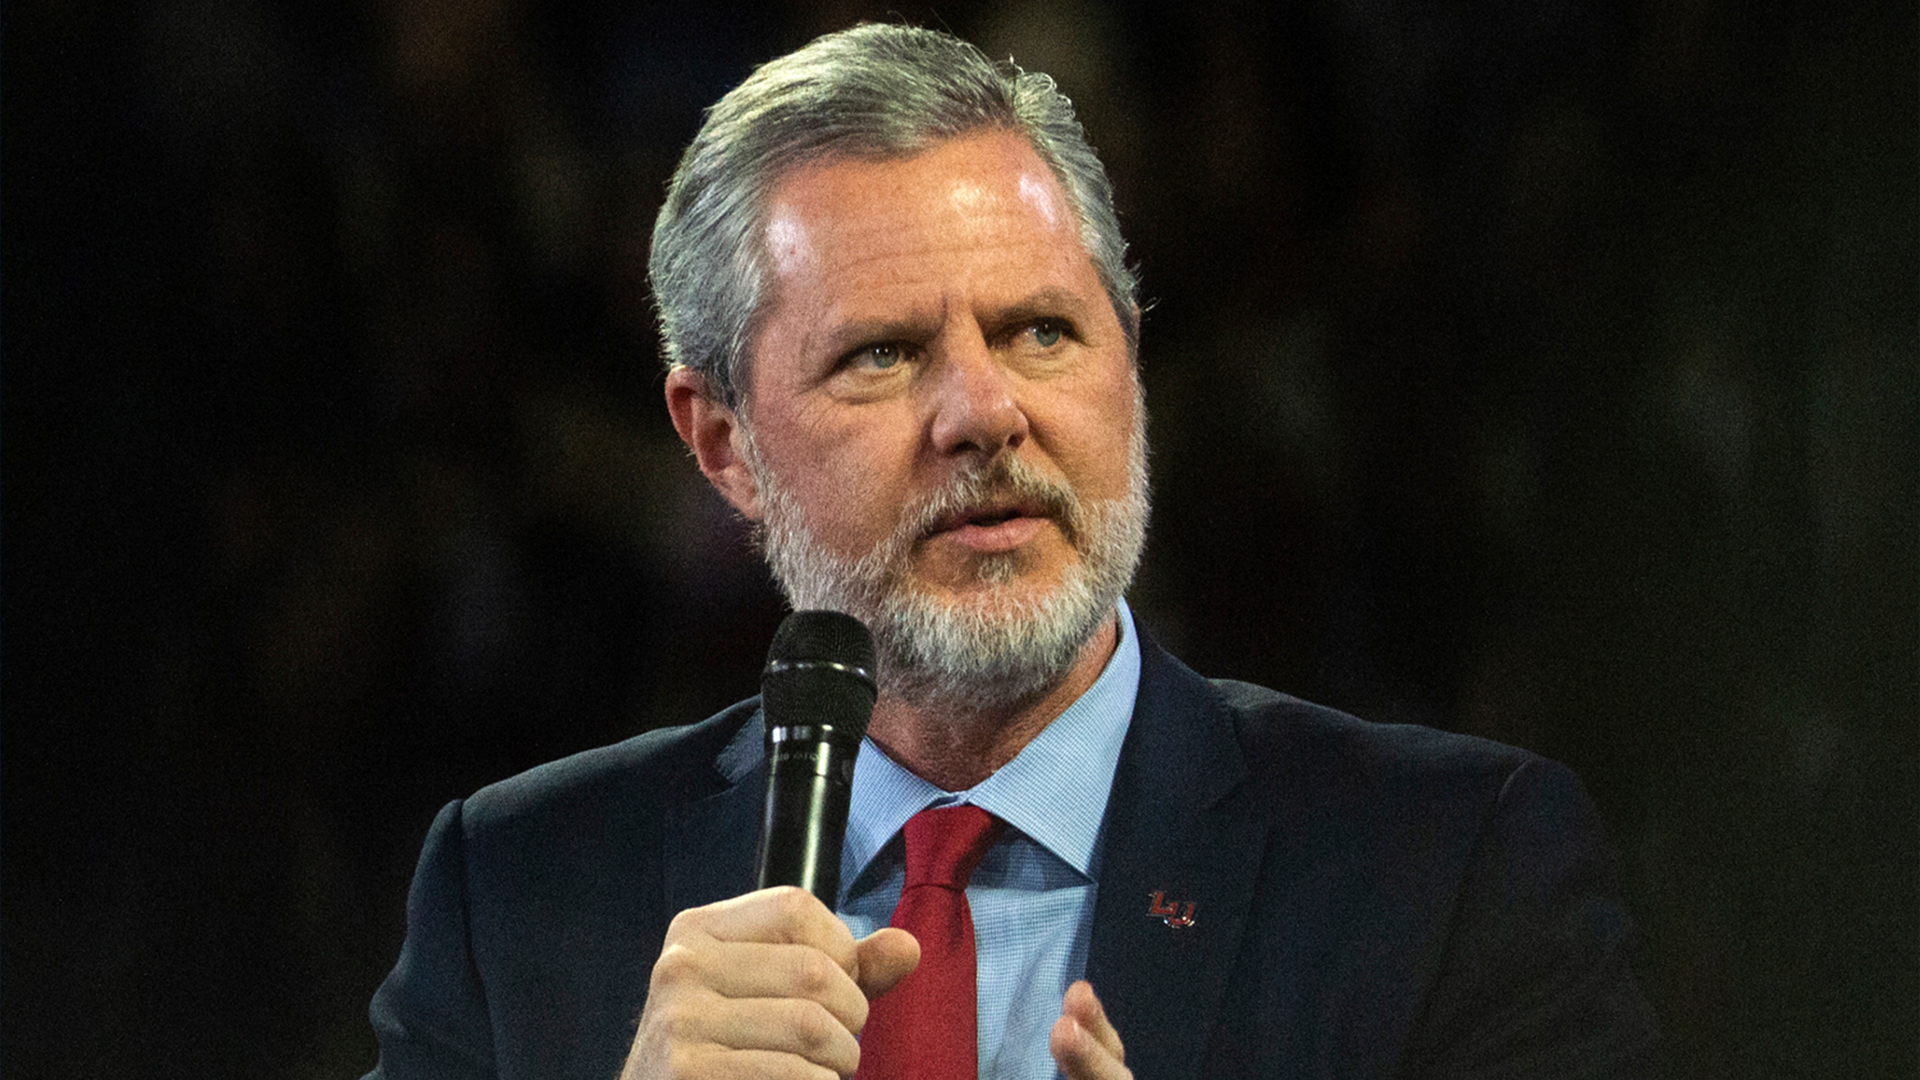 What religion did Jerry Falwell Jr. practice?